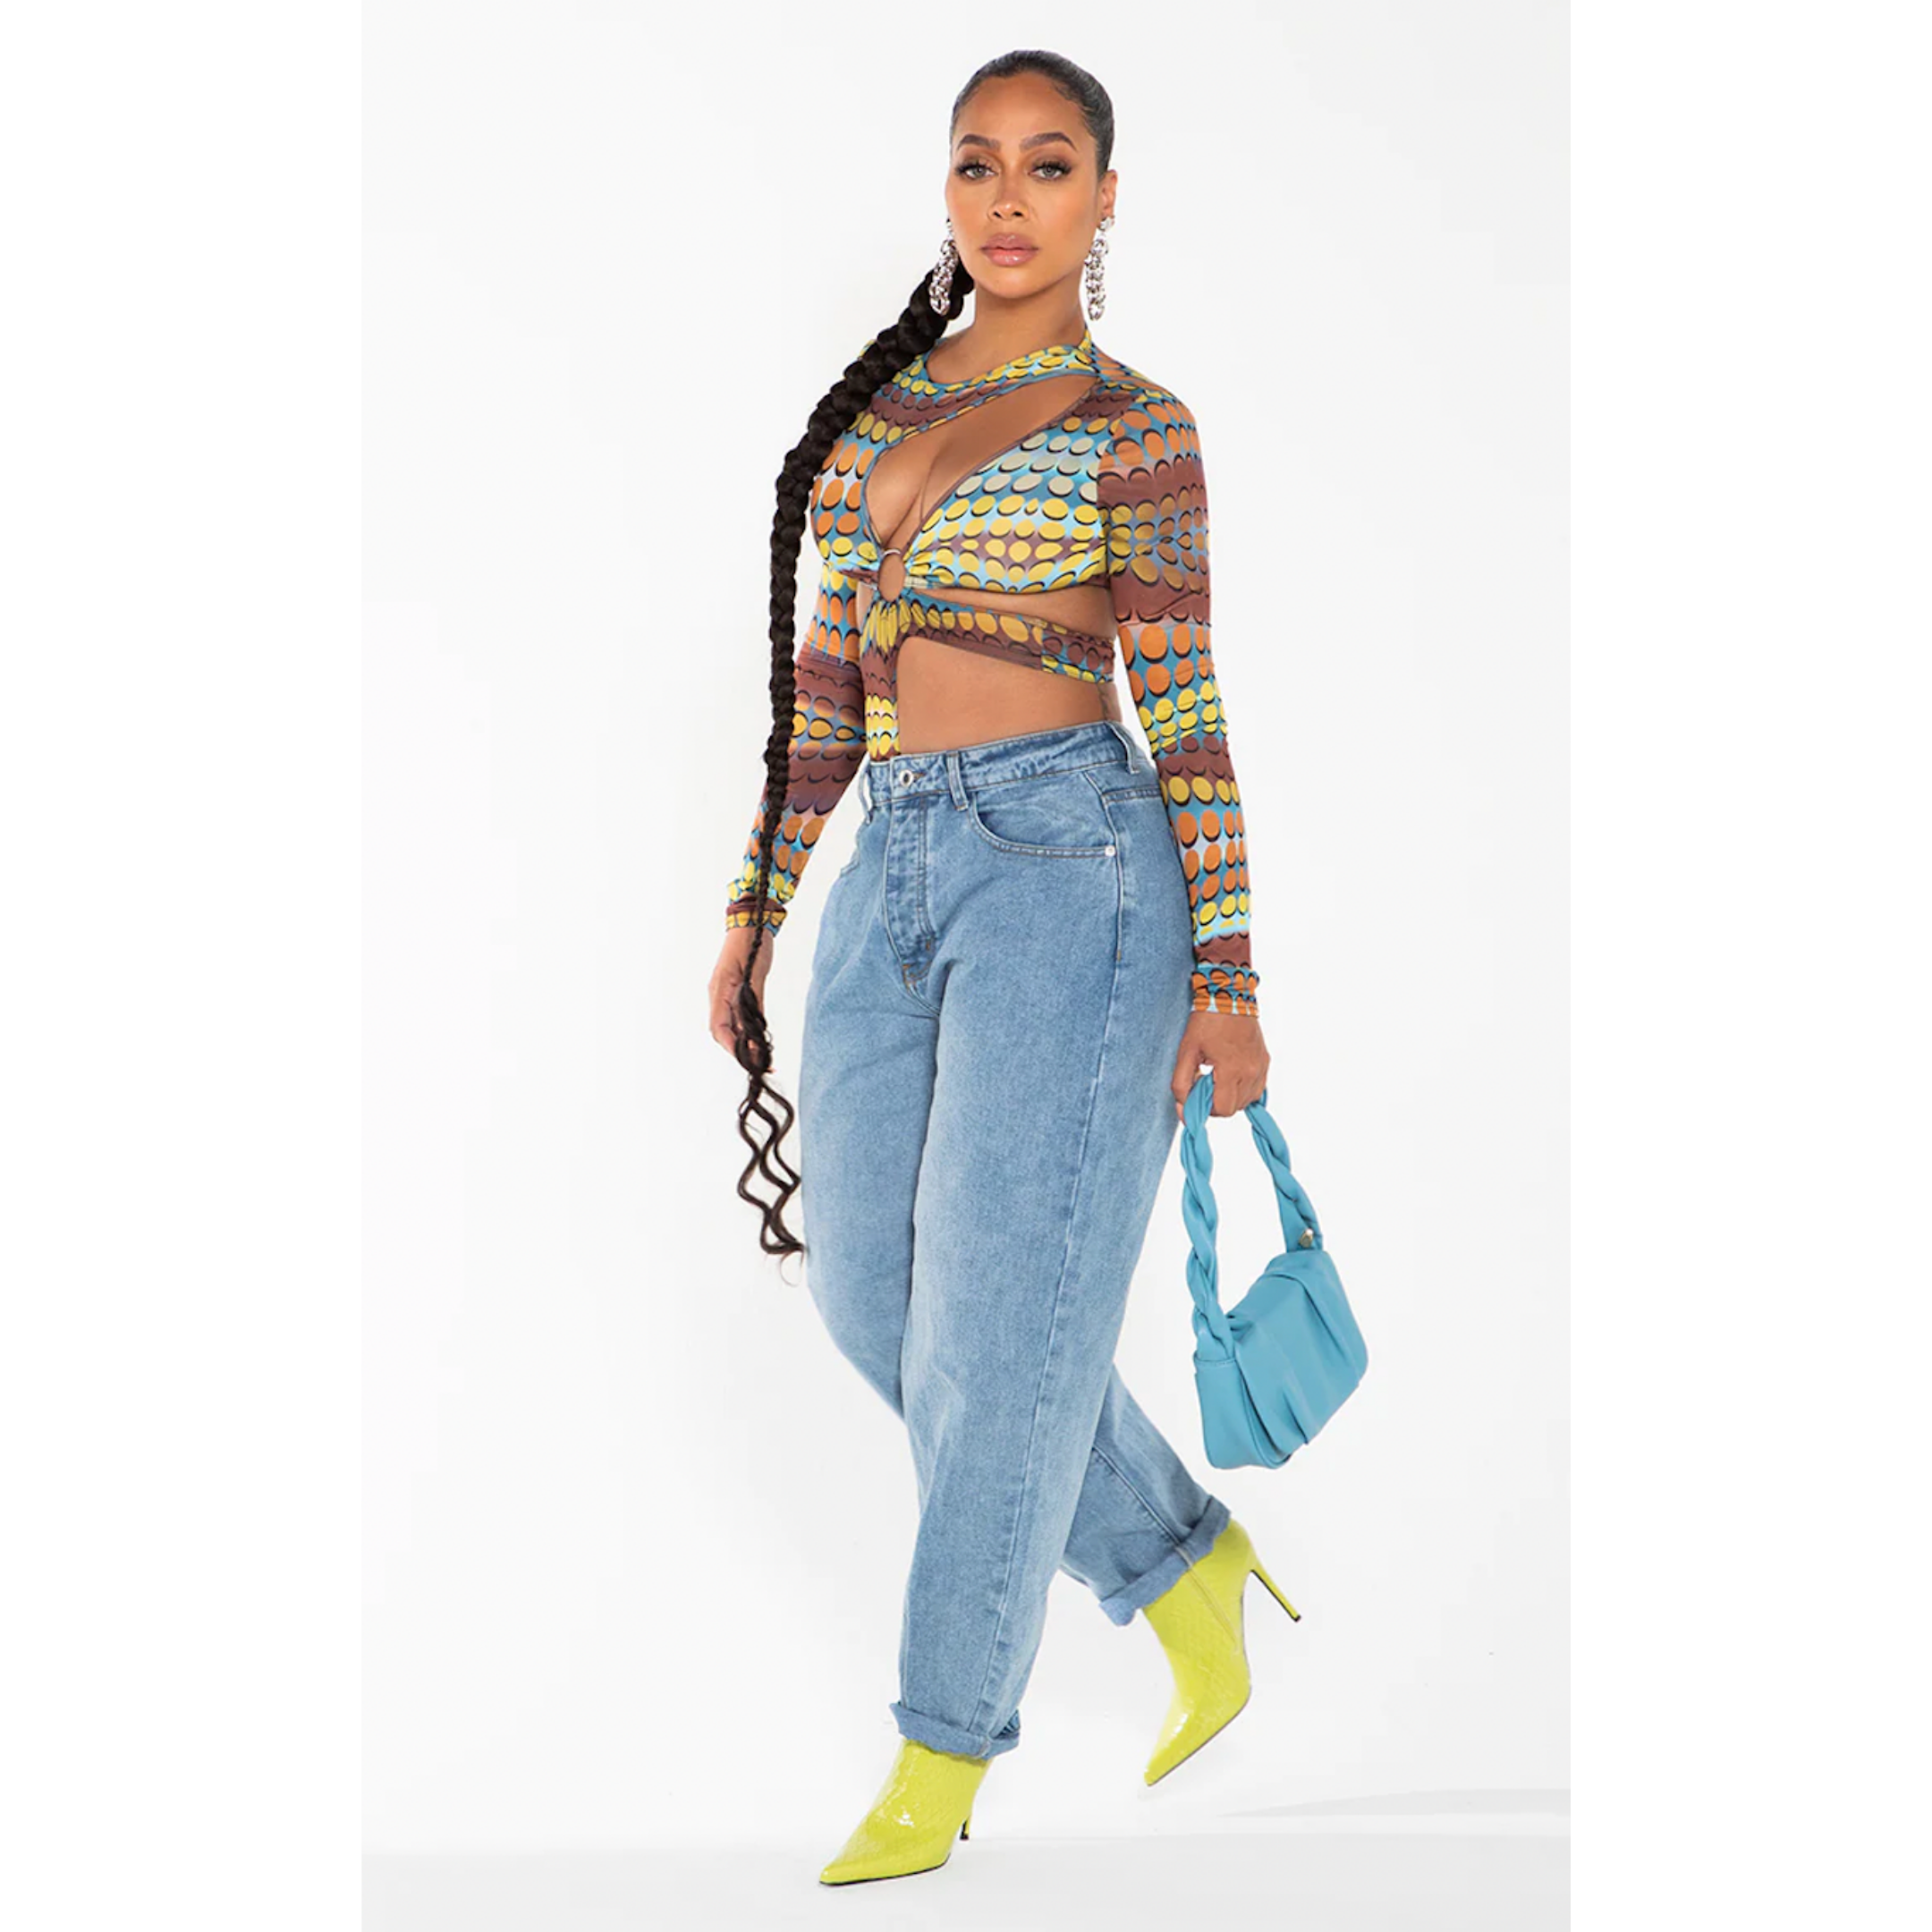 LaLa's Second PrettyLittleThing Drop Is Here, And The Styles Are So Trend-Forward